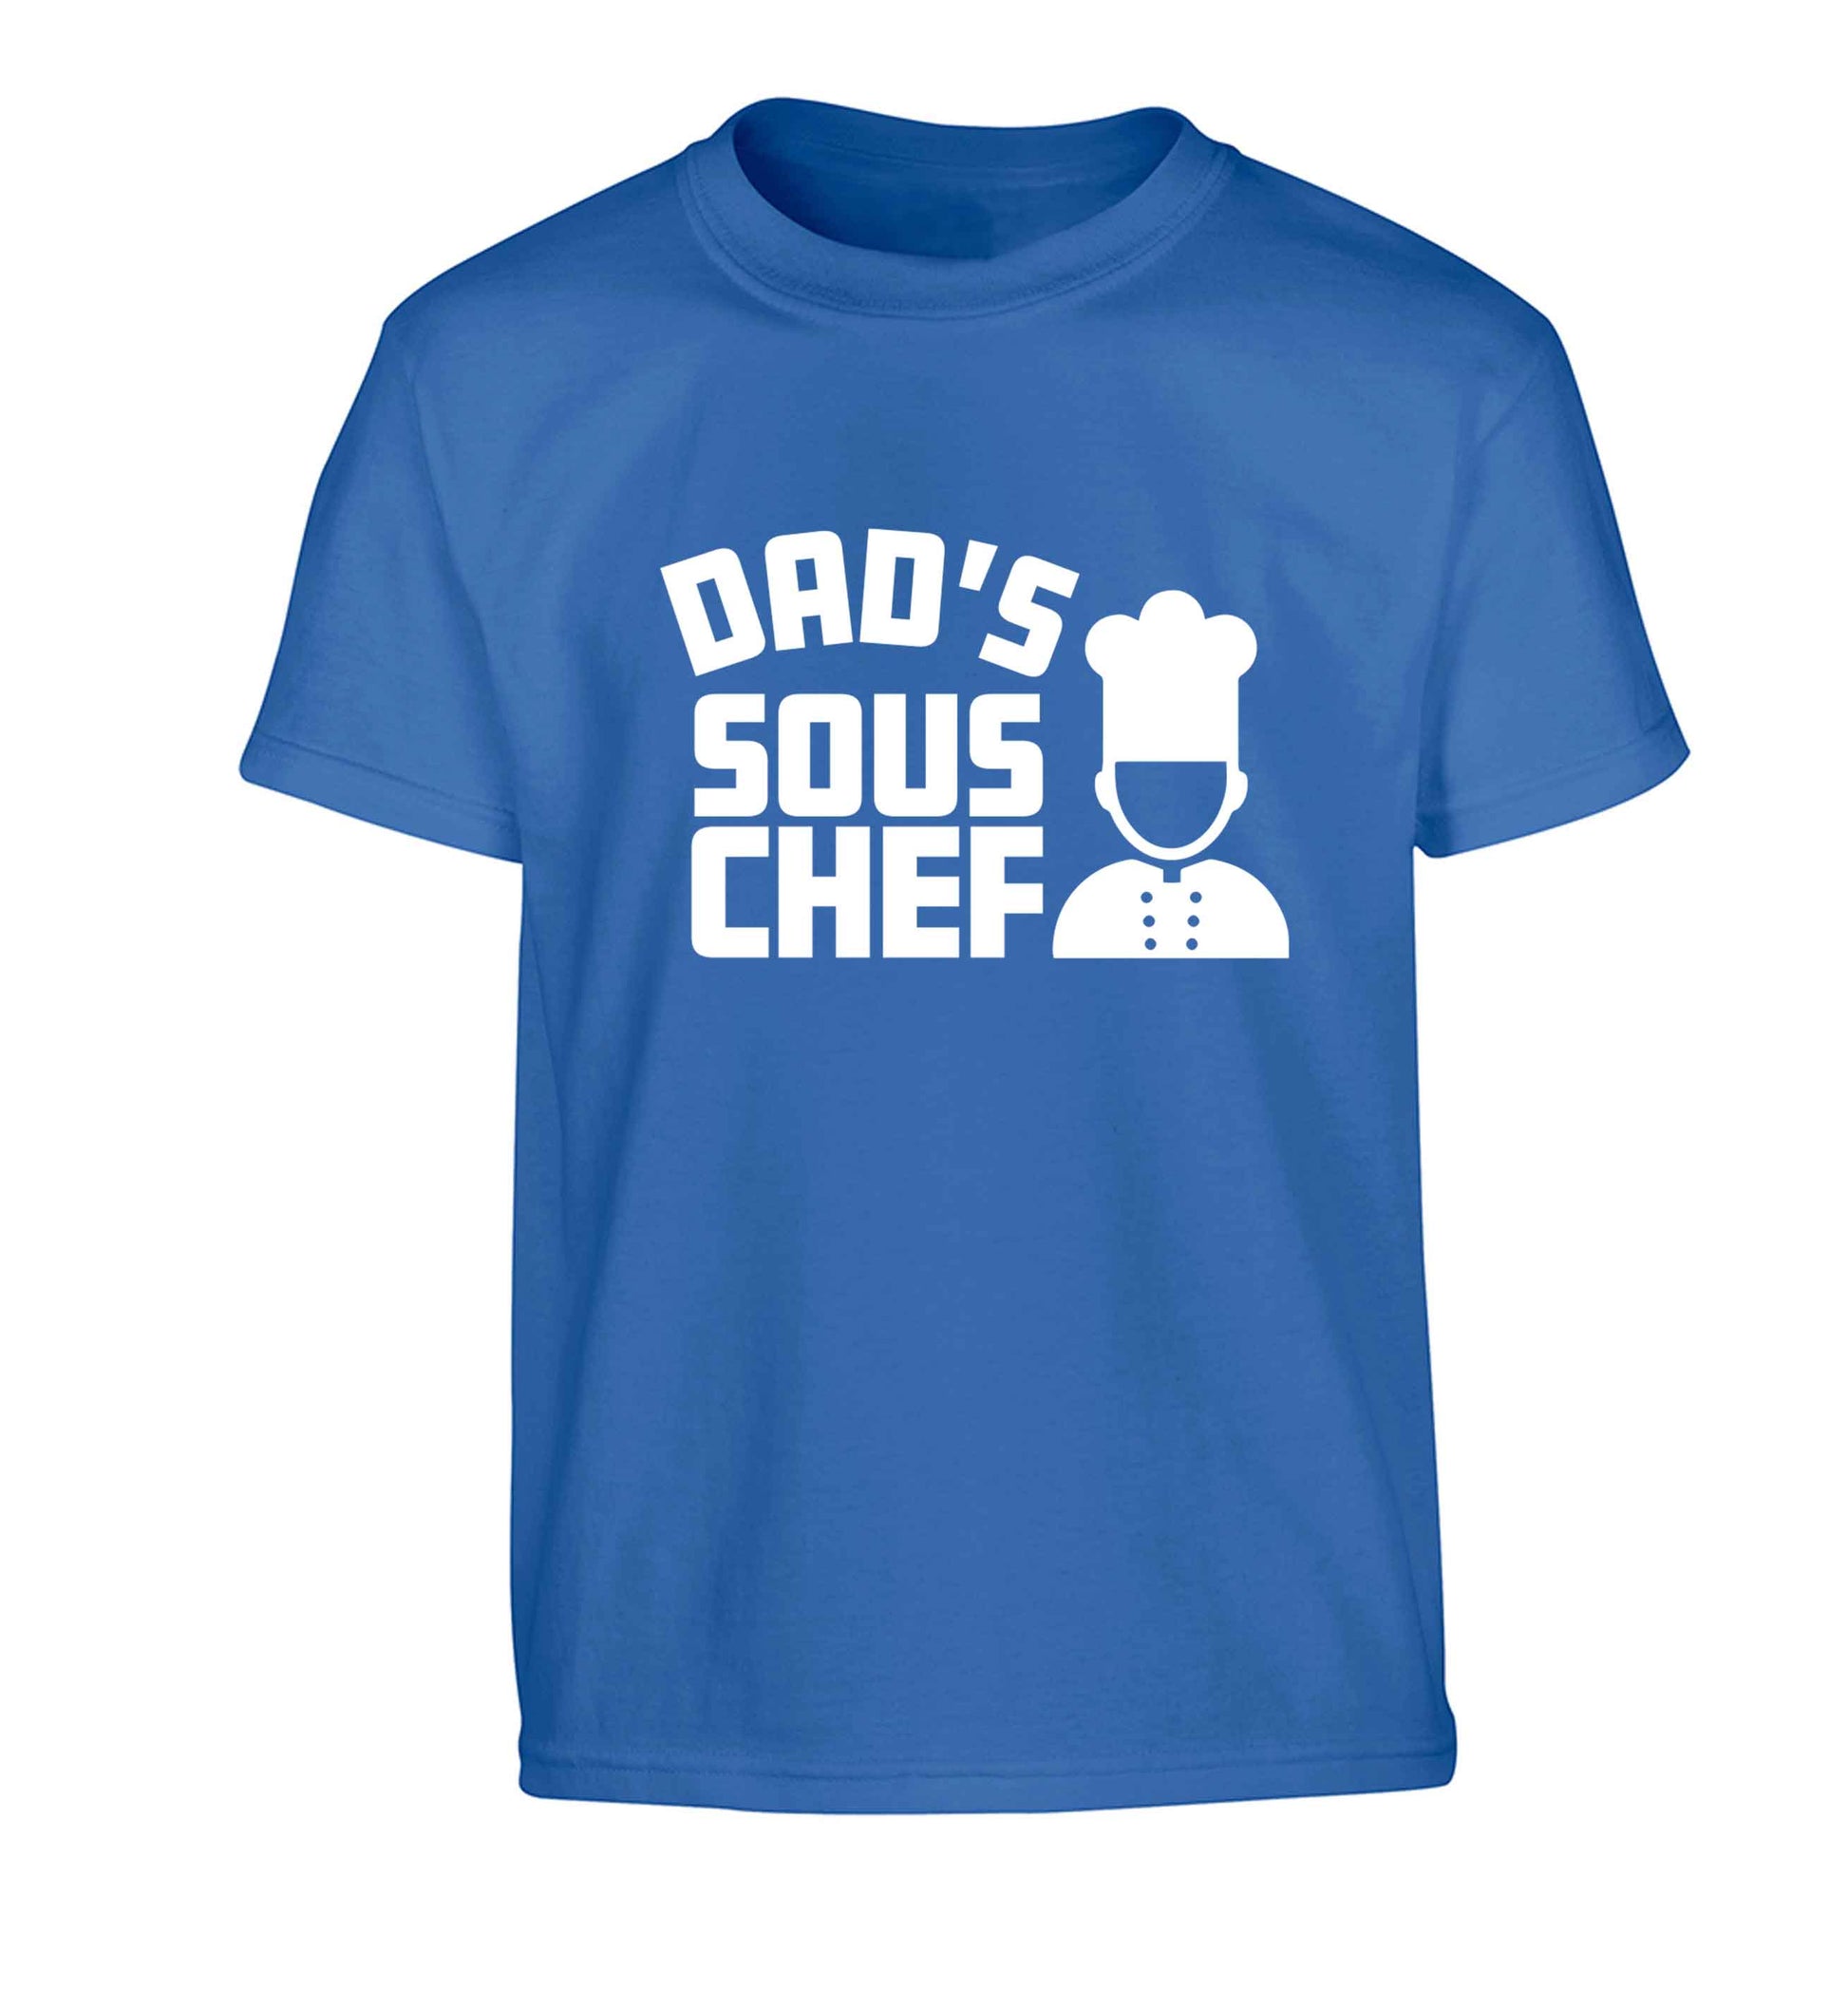 Dad's sous chef Children's blue Tshirt 12-13 Years